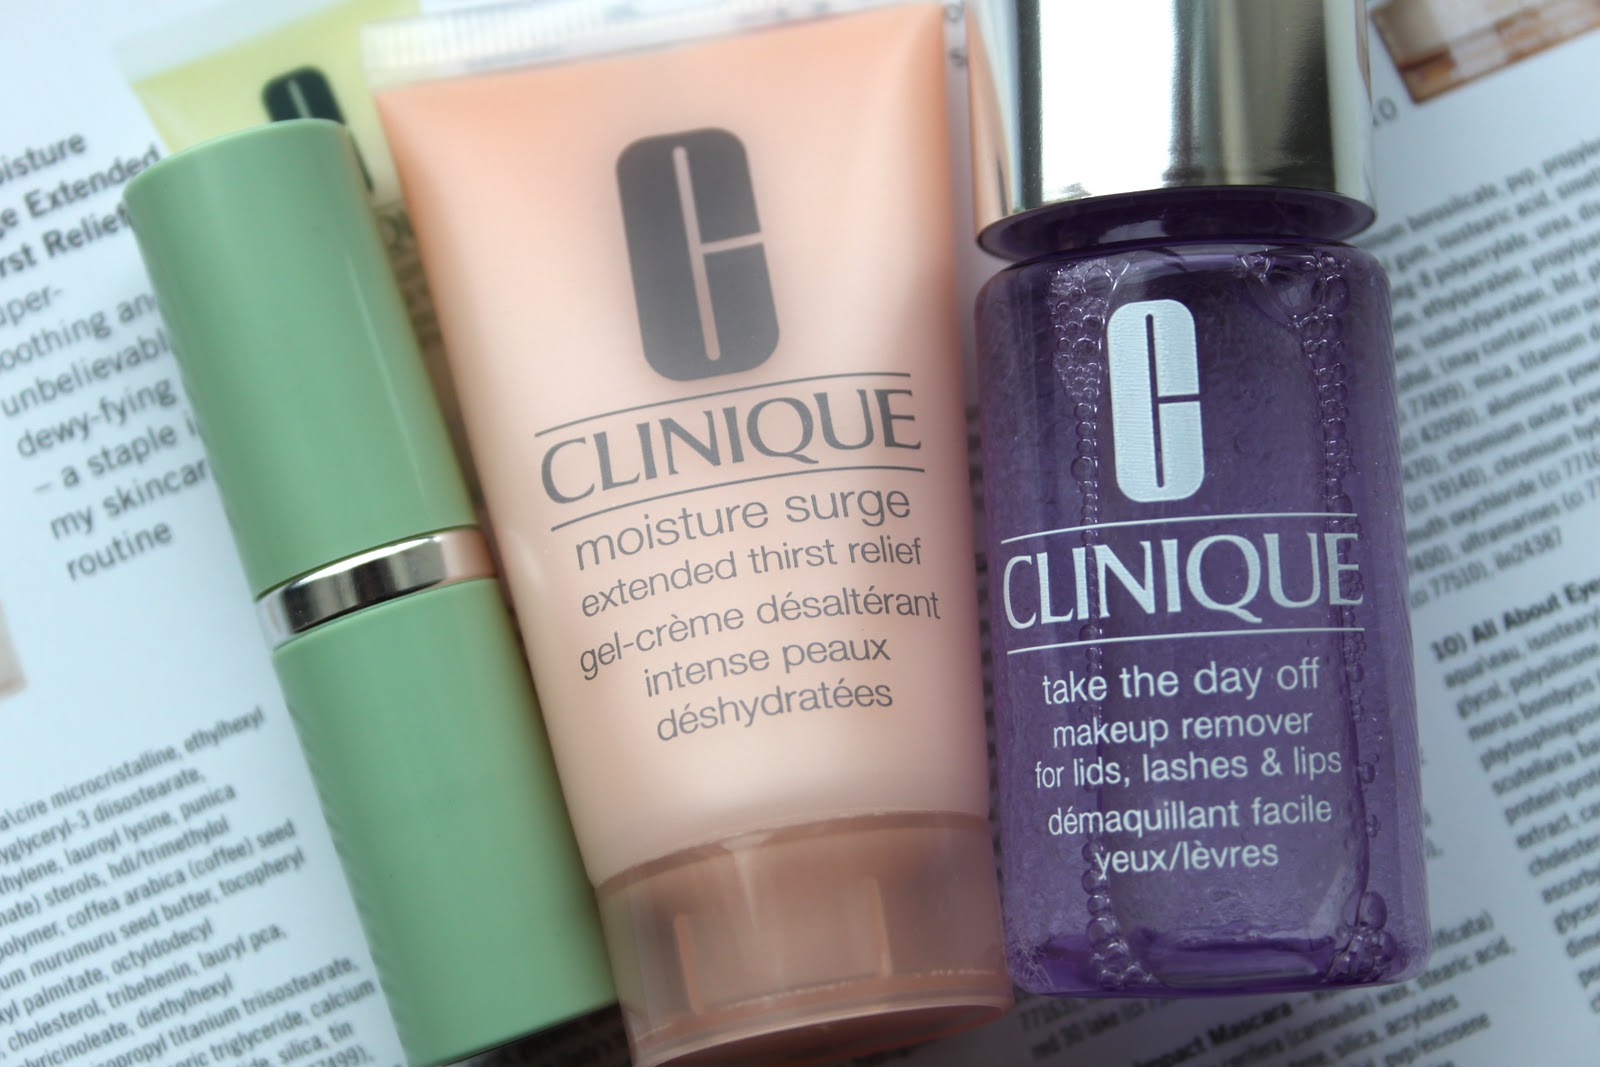 the beauty series | uk beauty blog: glamour magazine with free clinique ...